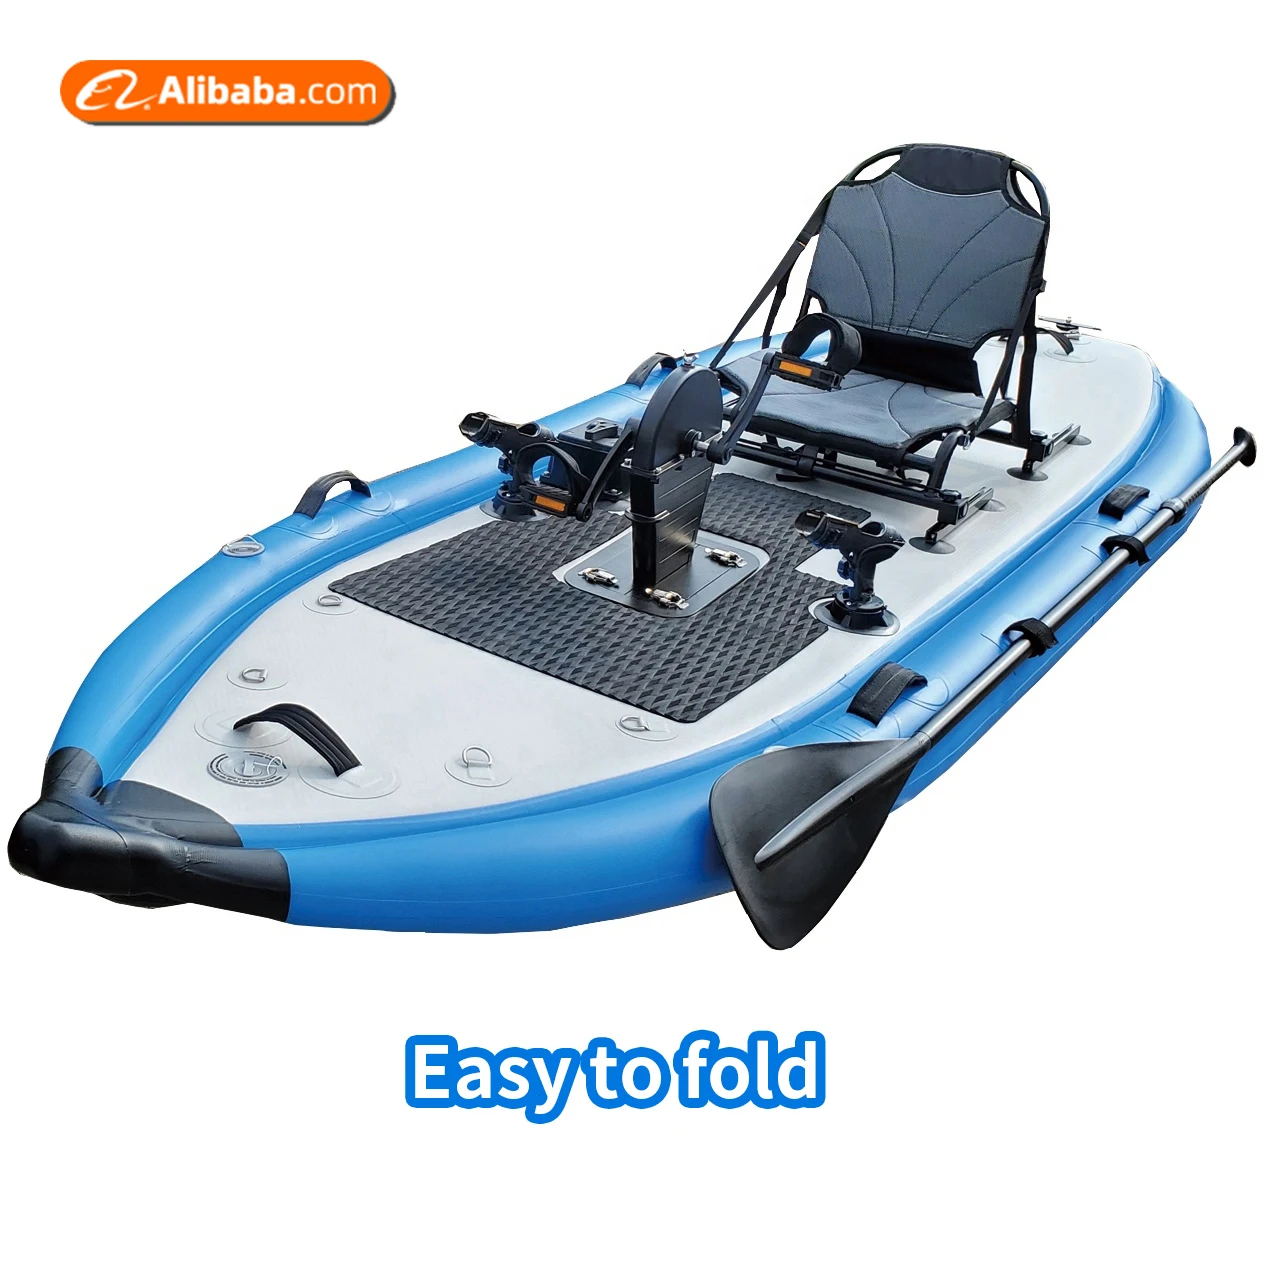 

Pedal Drive Lightweight 1-person Paddle Boats Kayak For Fishing Rowing 1 Seats Inflatable Kayak Water Sports 1 Piece, Multi colors for choices